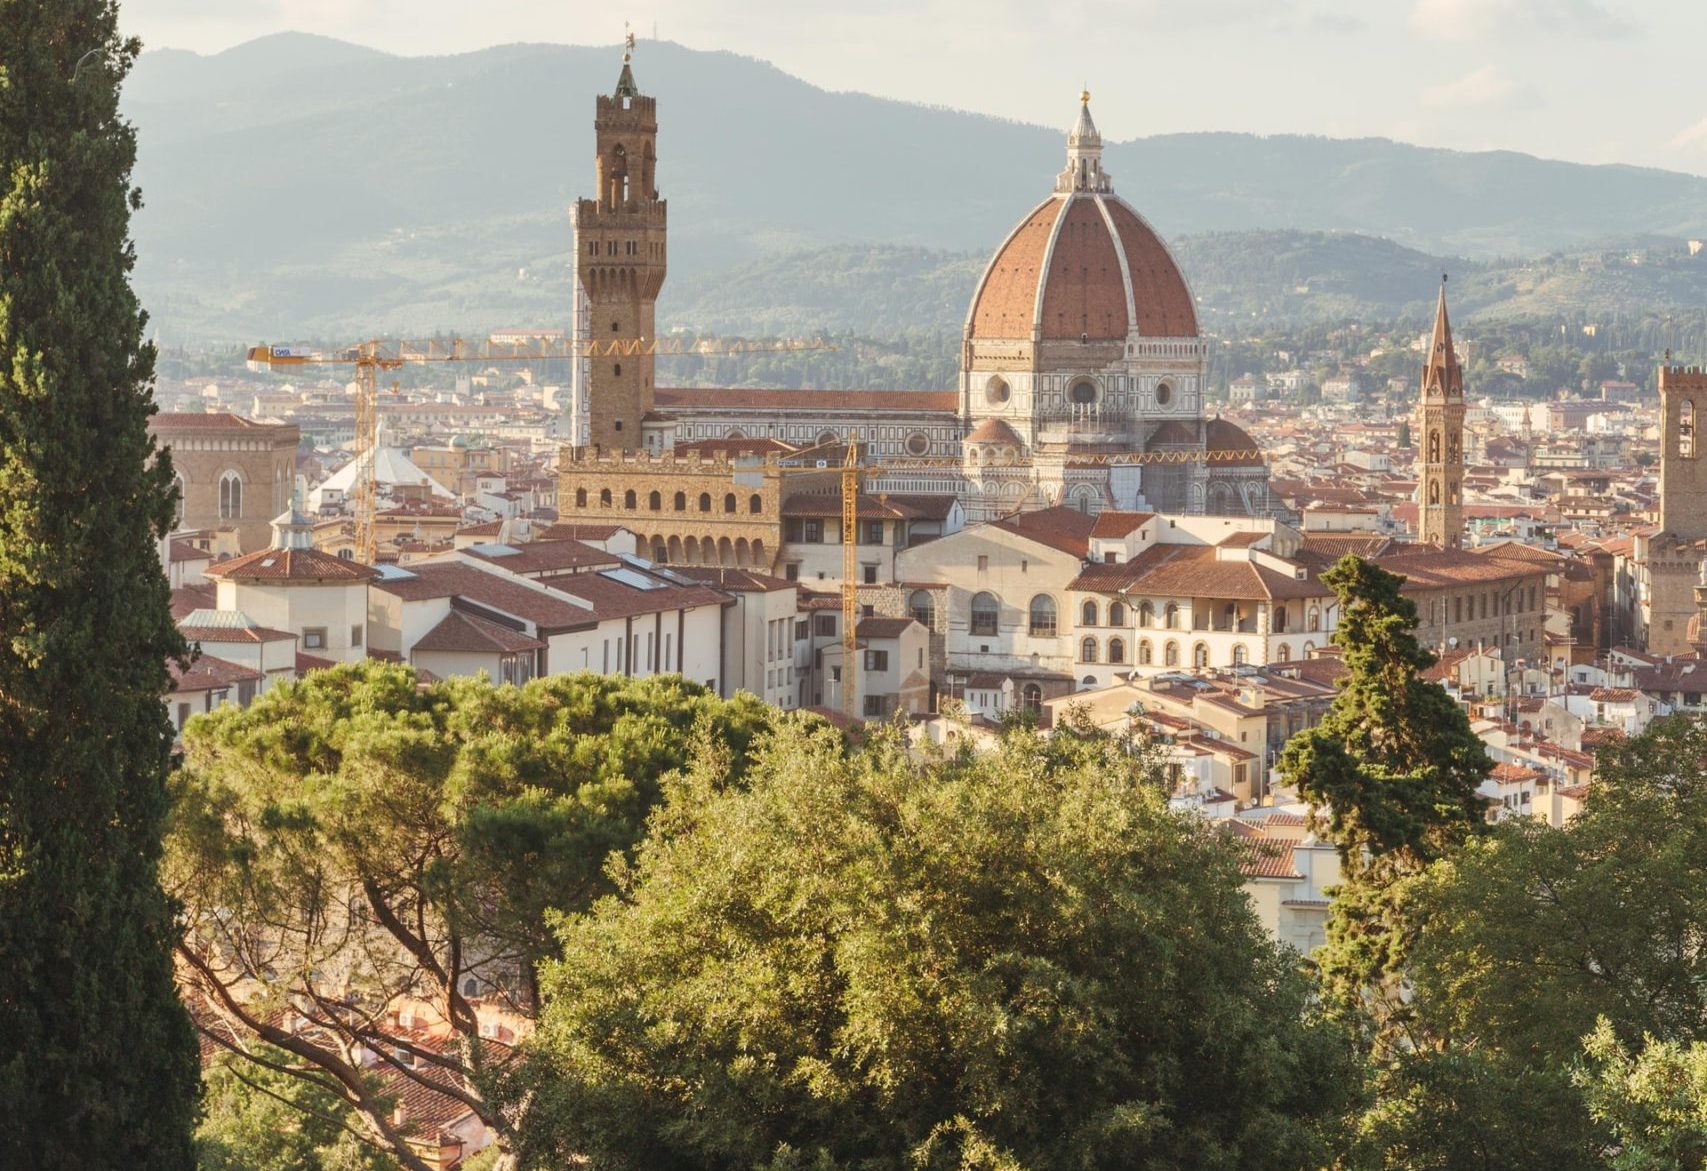 A view of the Duomo Cathedral in Florence, Italy